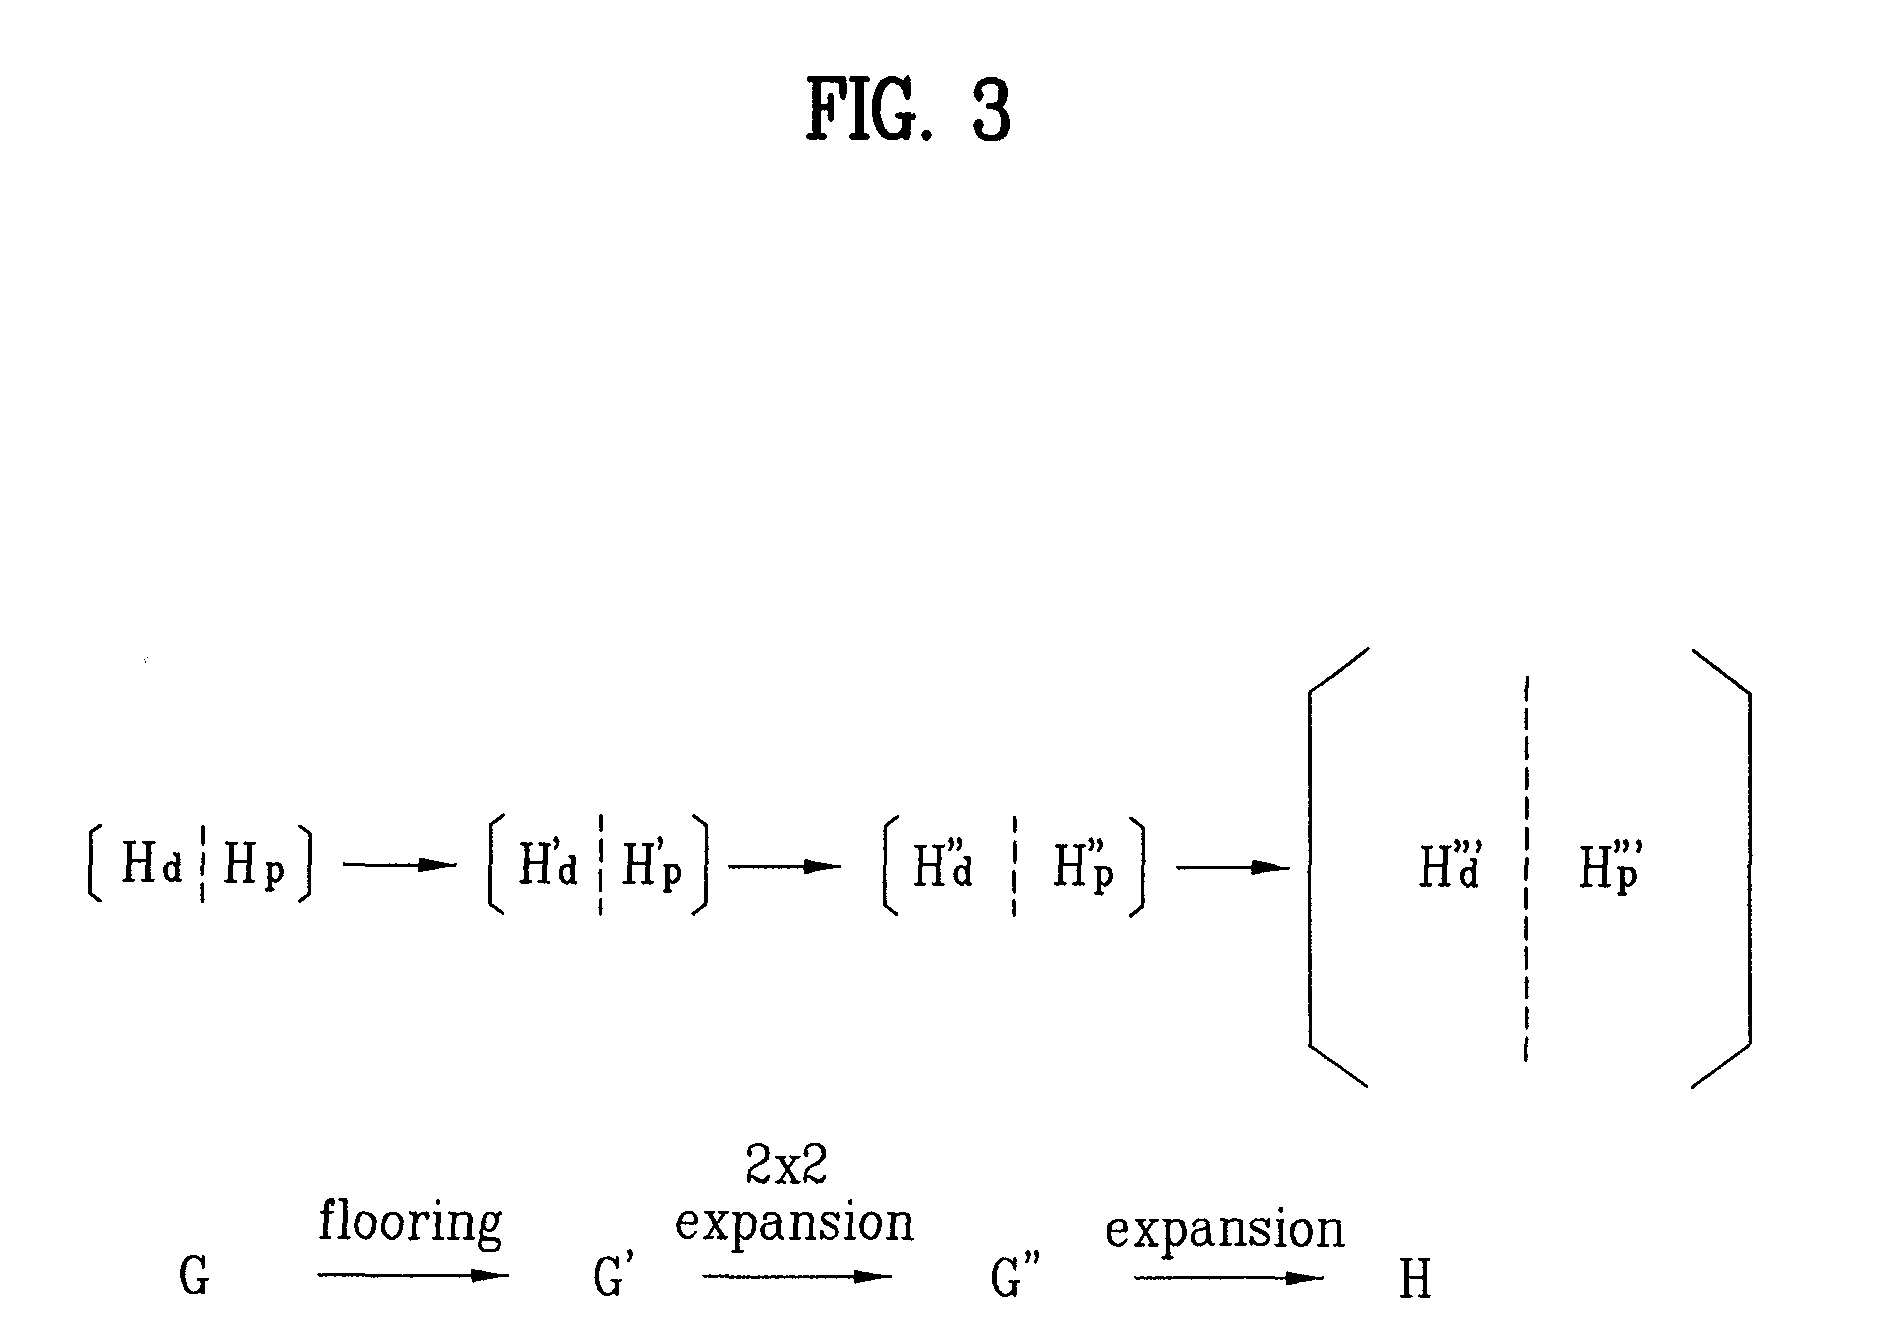 Method of generating a parity check matrix for LDPC encoding and decoding